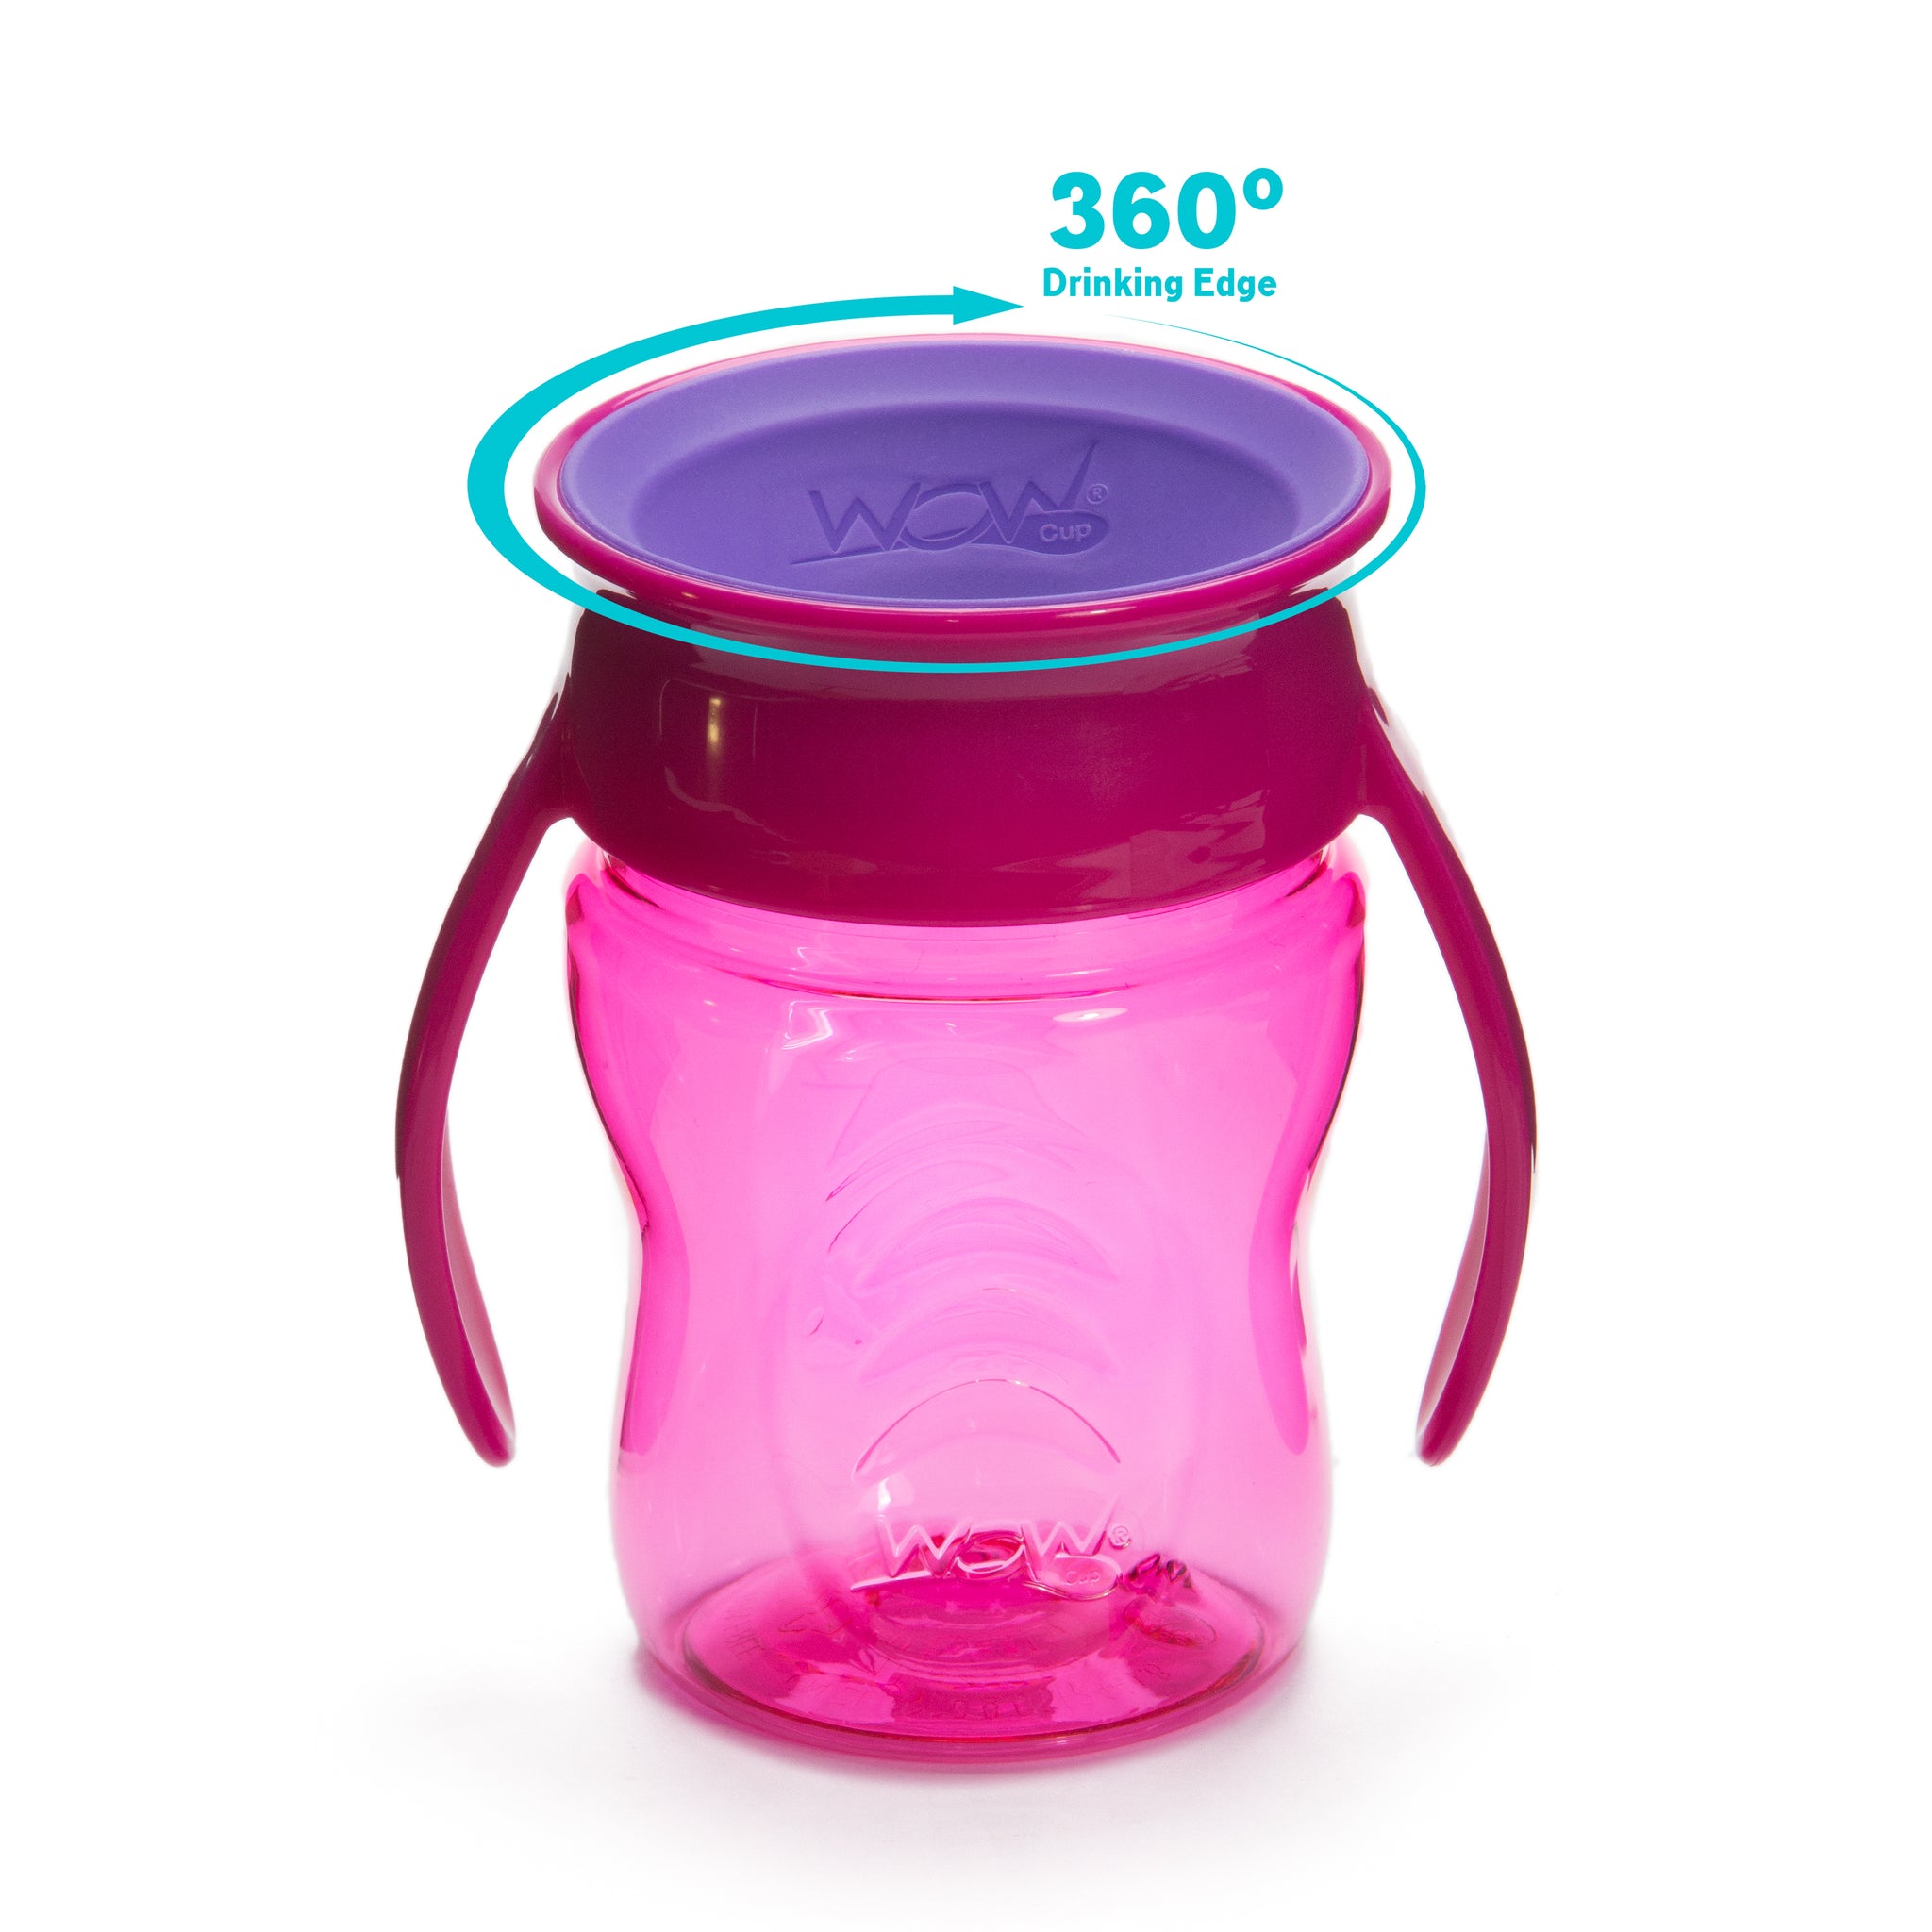 WOW CUP for Kids 360 Drinking Cup - Blue, 10 oz. /296 ml - WOW GEAR